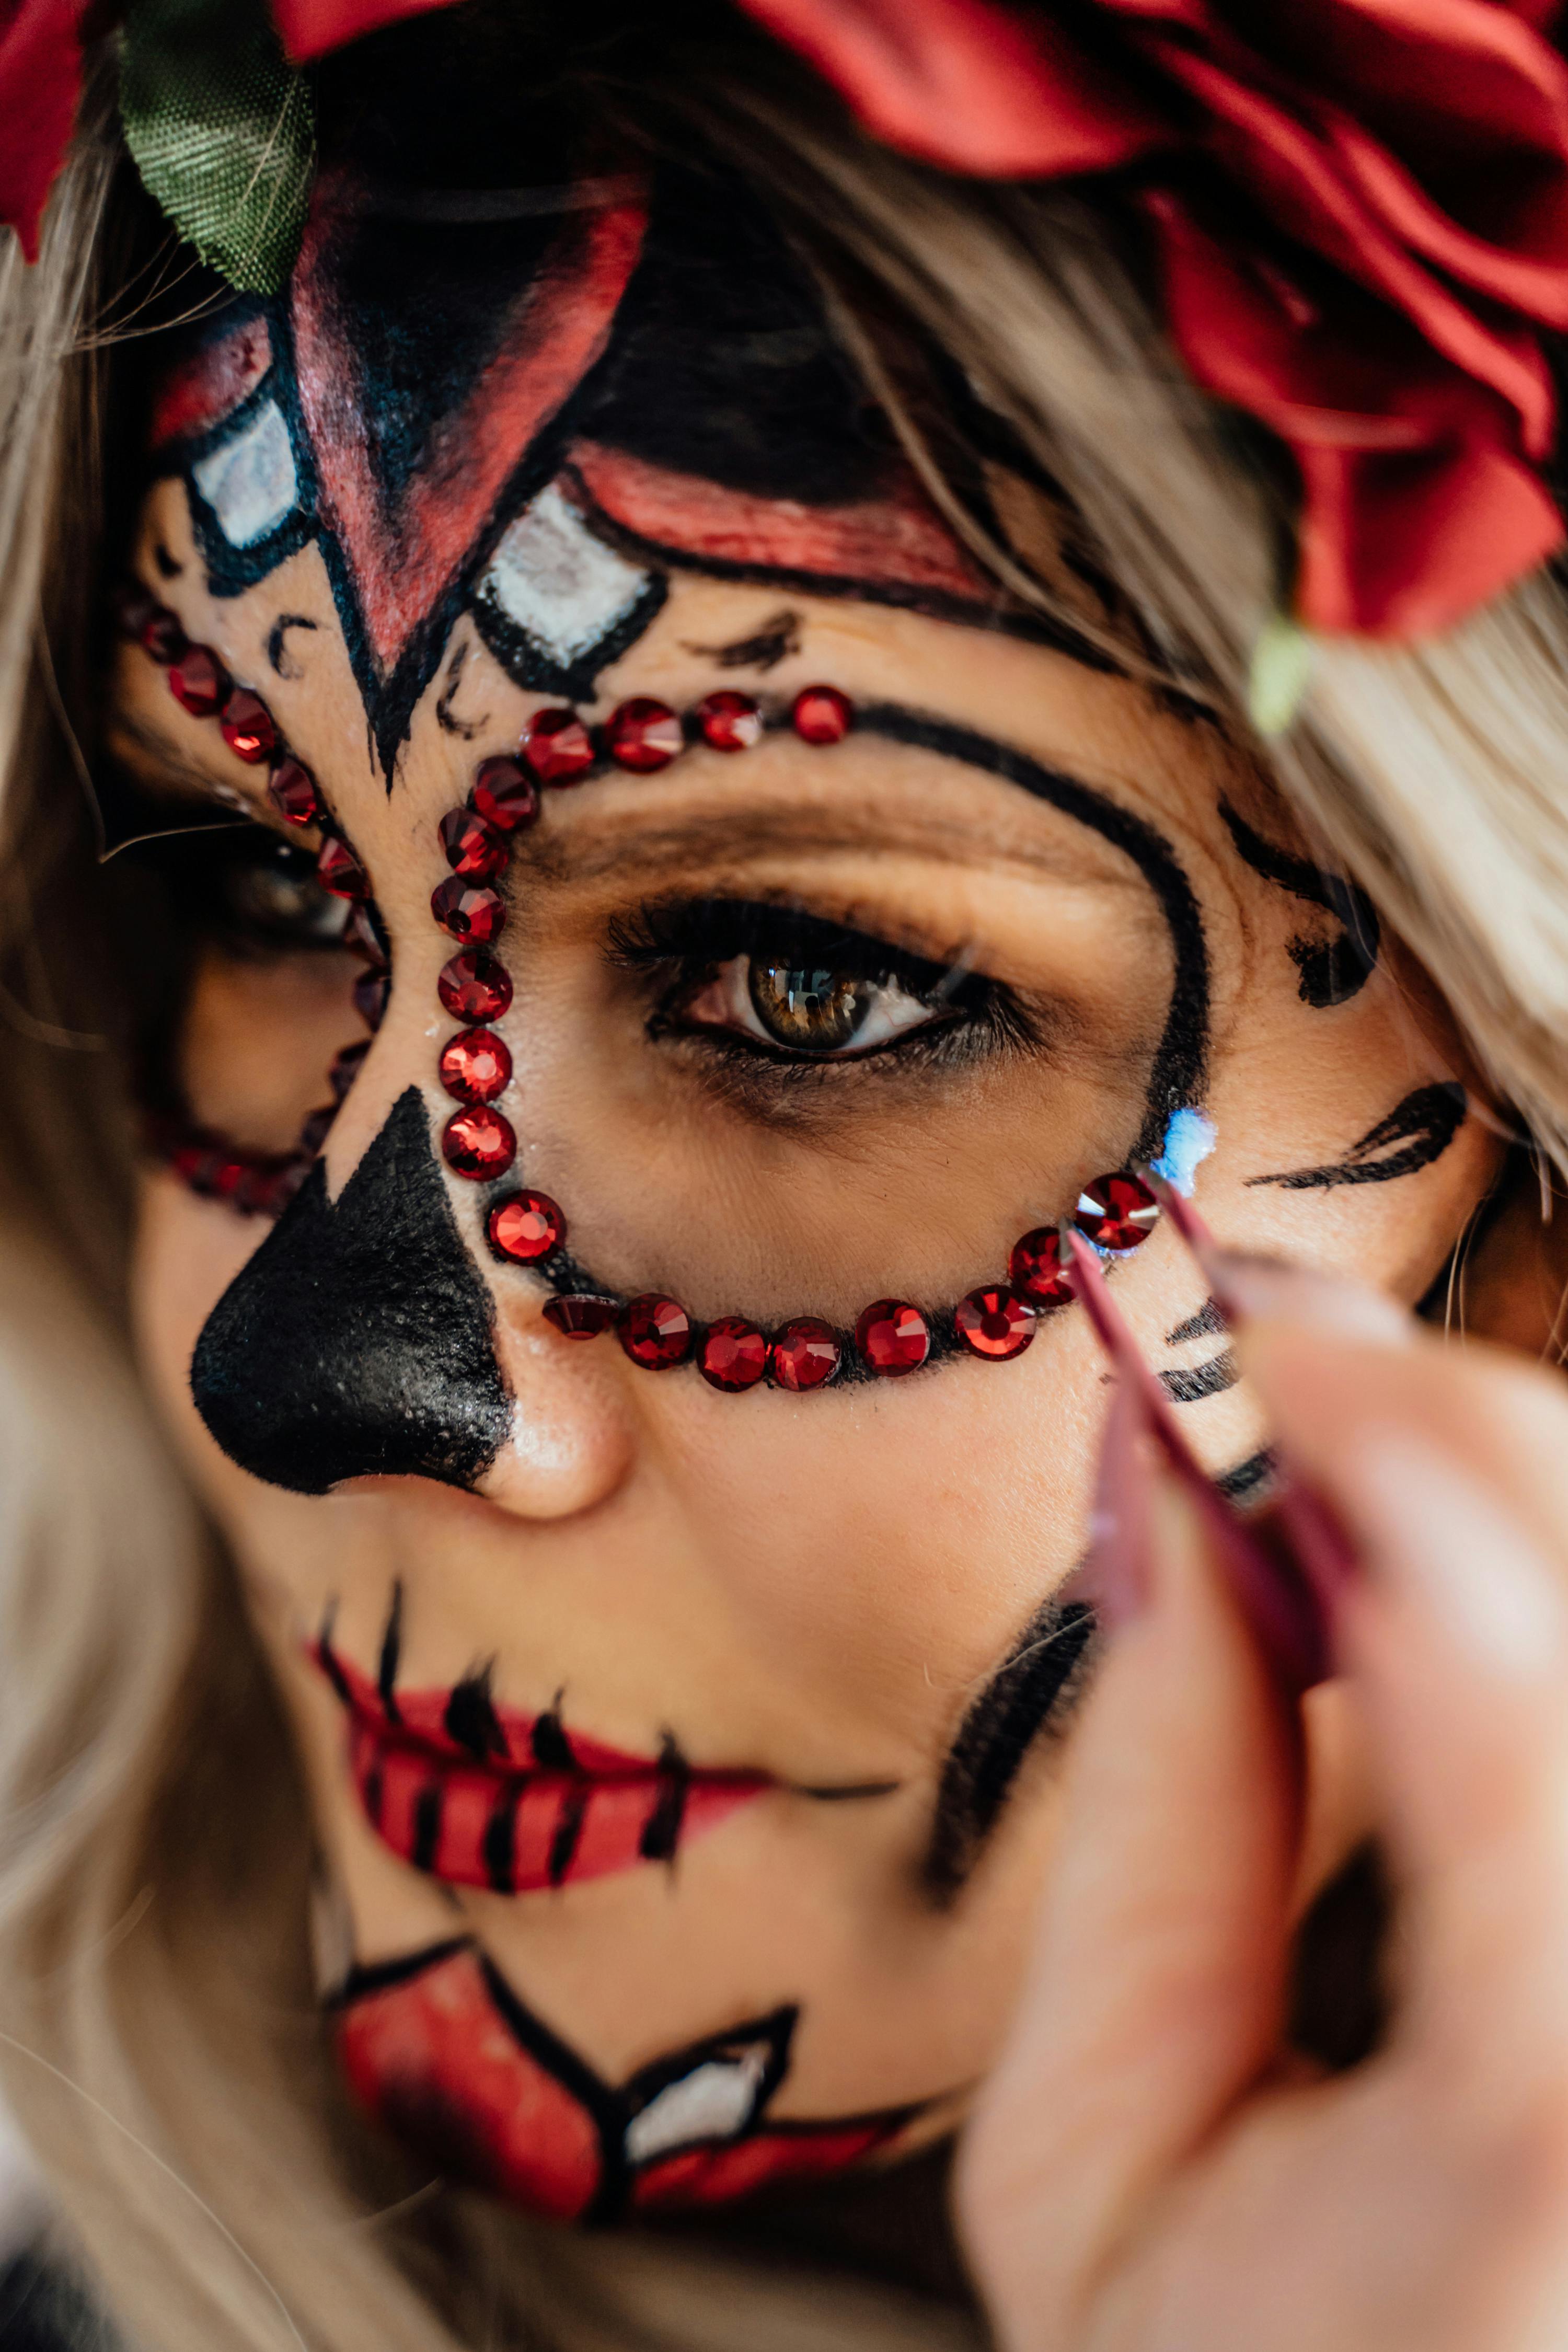 Woman with red and black face paint photo – Free People Image on